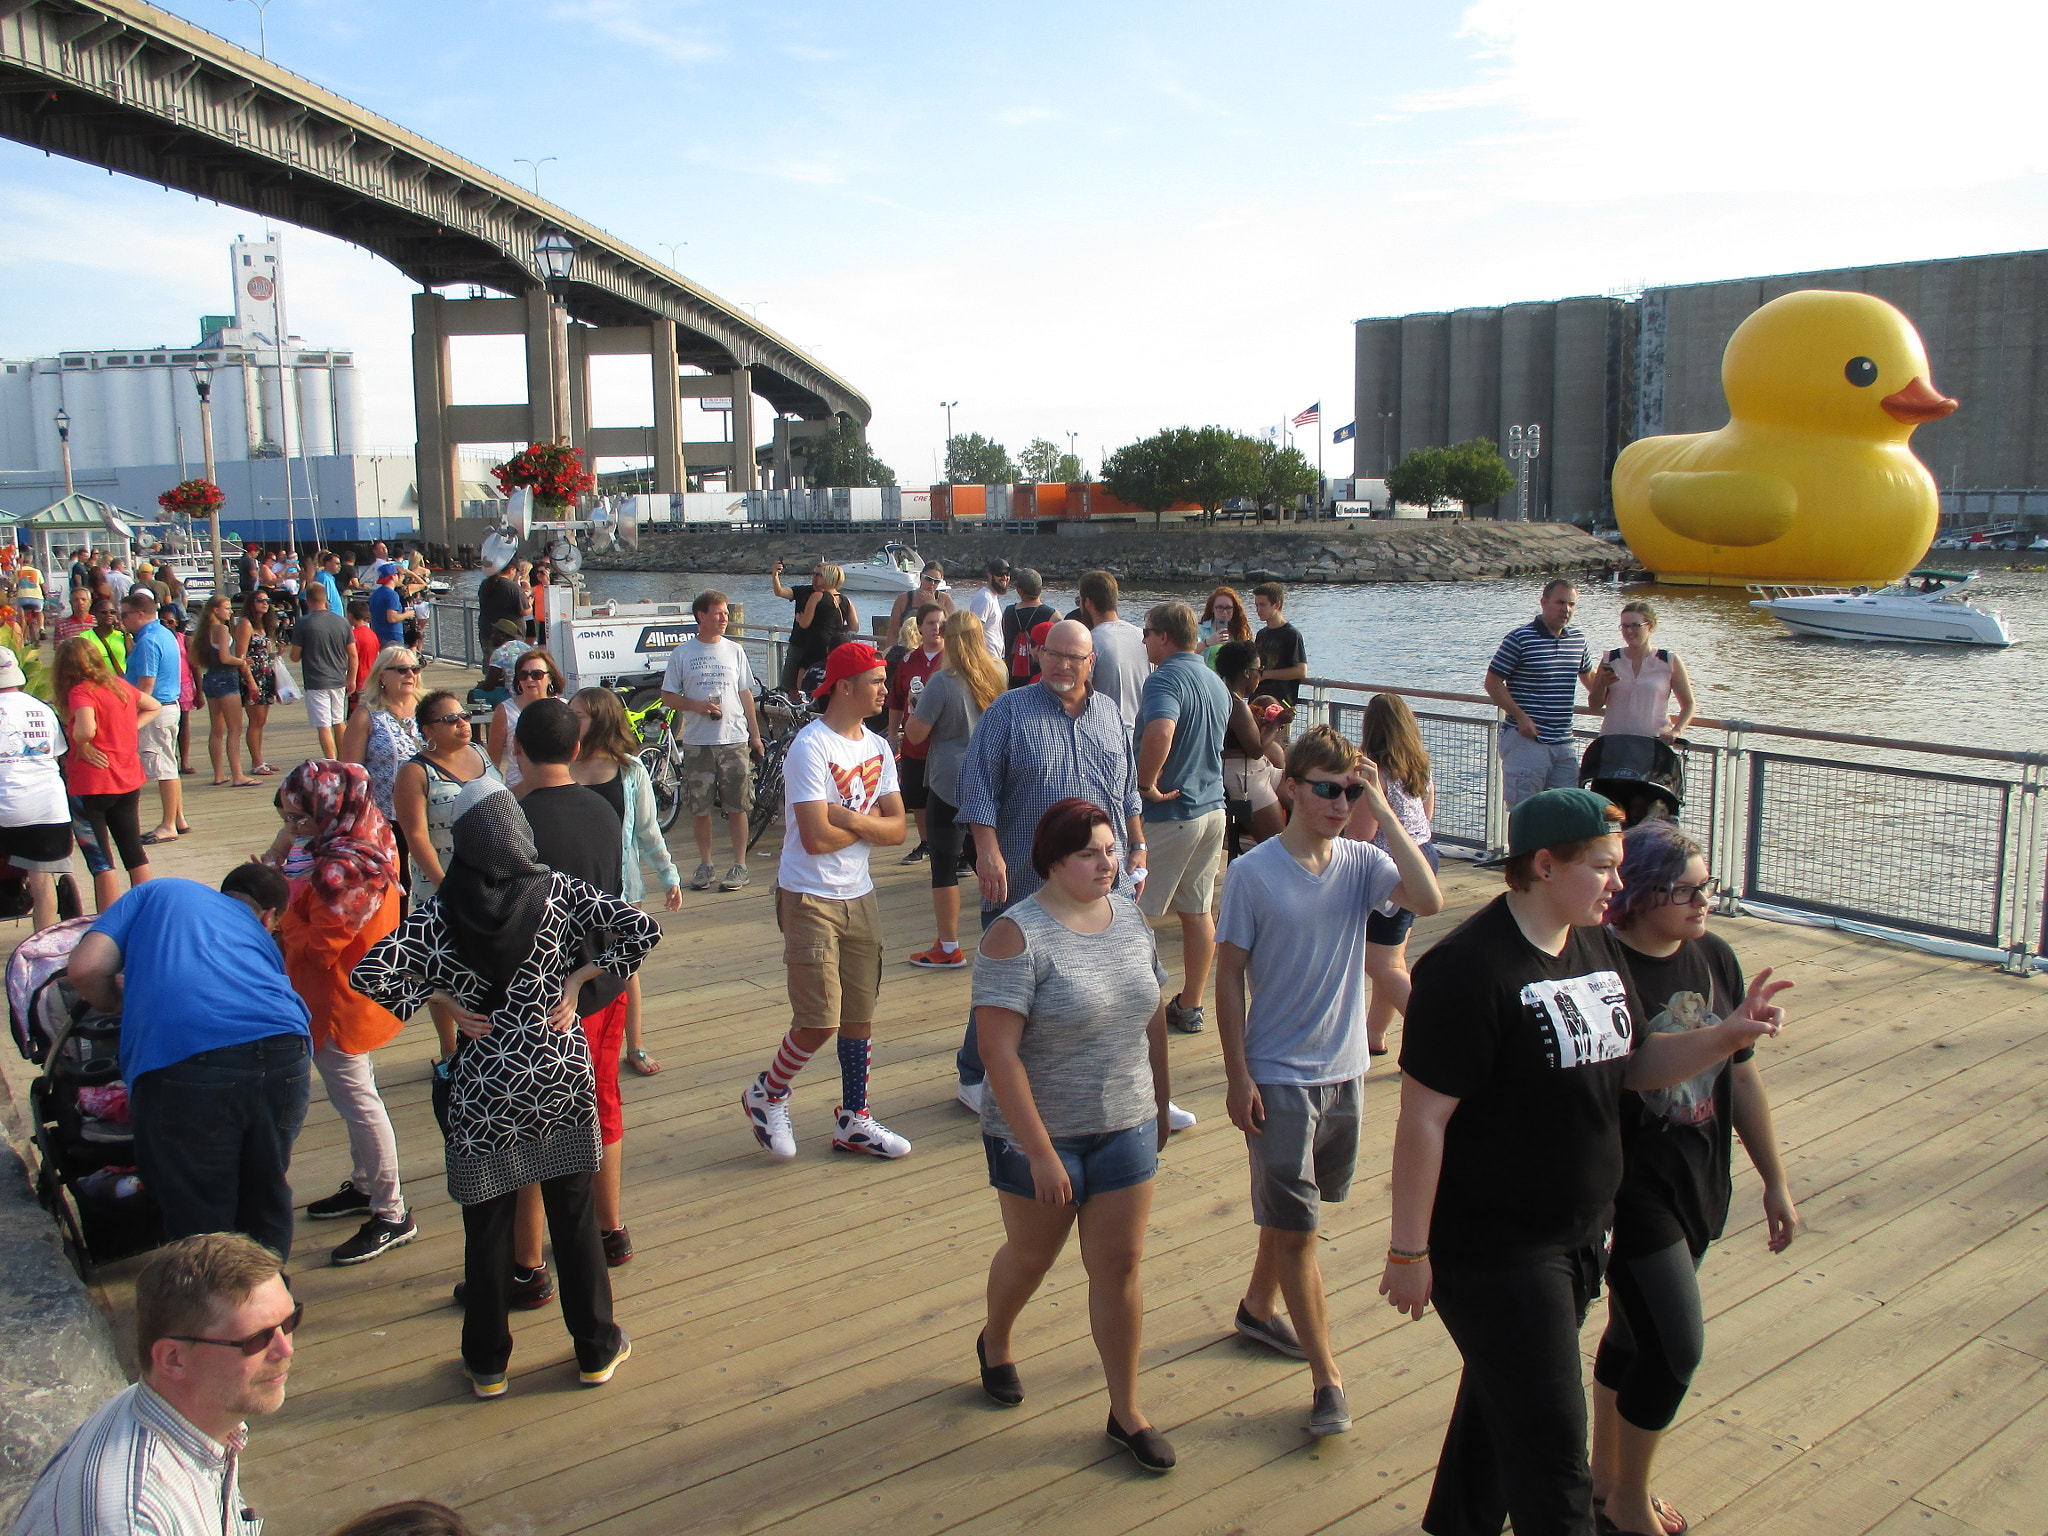 Canon PowerShot ELPH 135 (IXUS 145 / IXY 120) sample photo. Canalside crowd with duck 20160827 photography